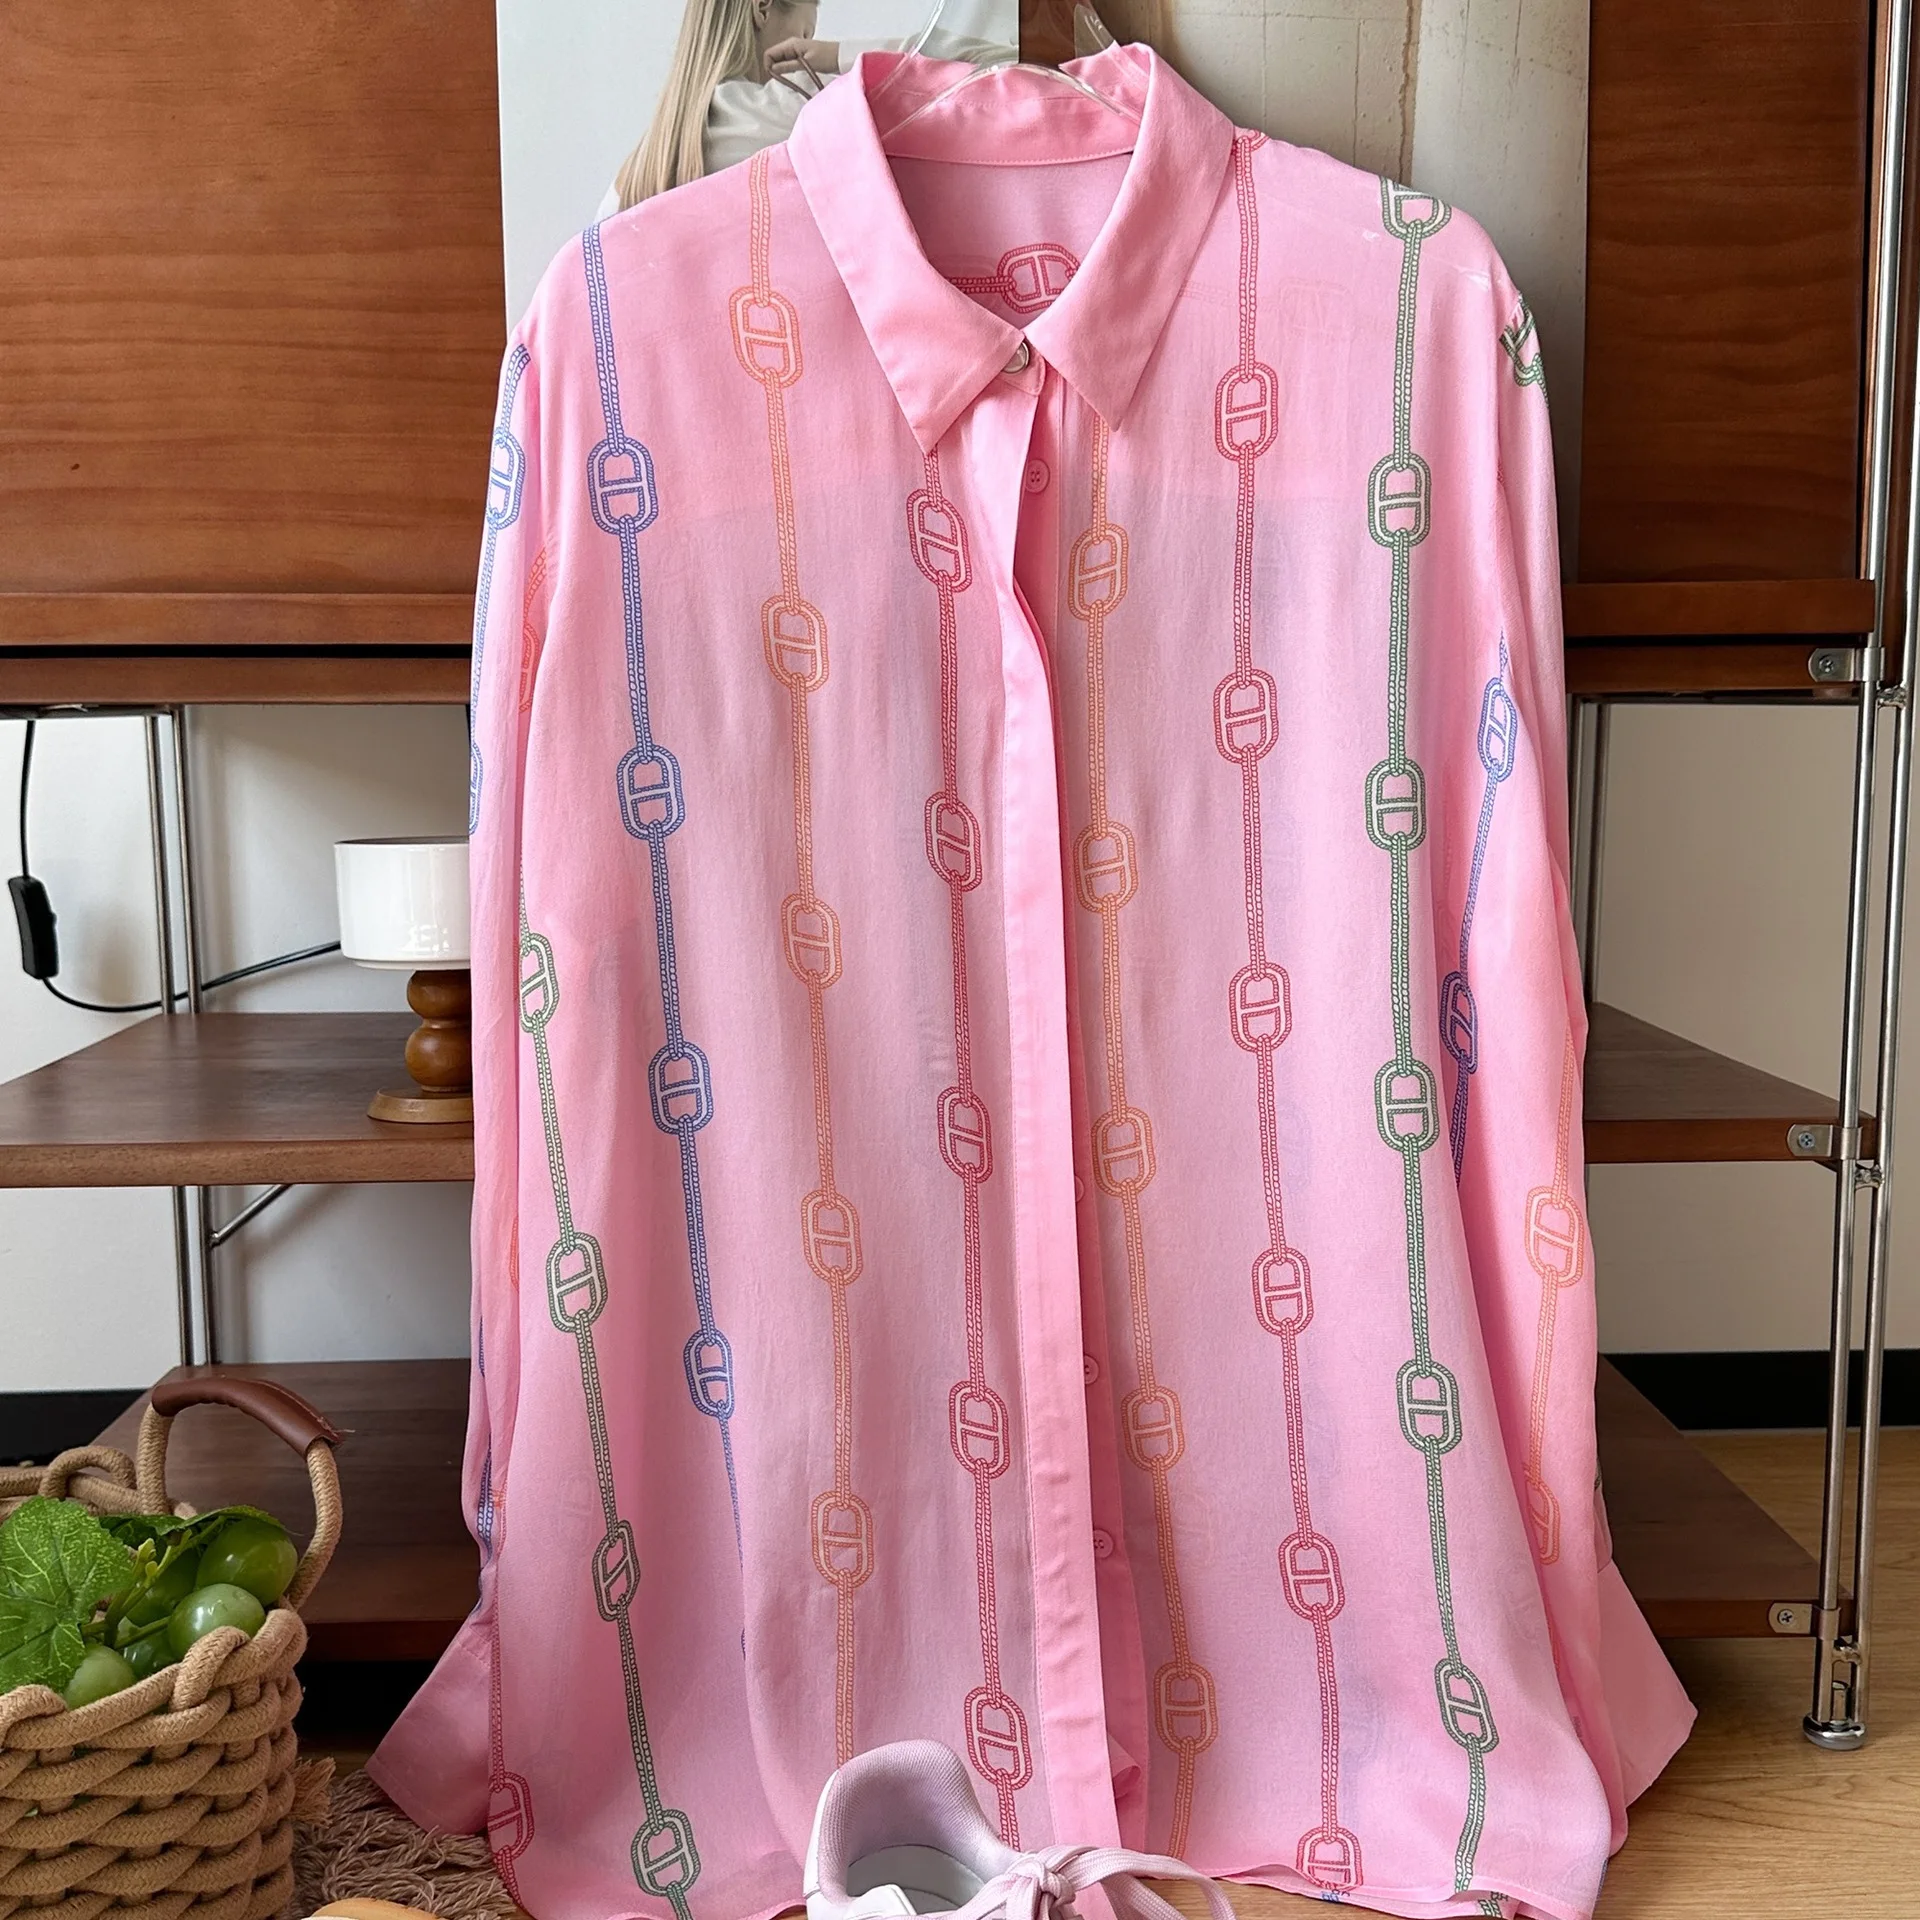 

High quality luxury design Old money style spring new classic pink pig nose button print loose comfortable long sleeve shirt